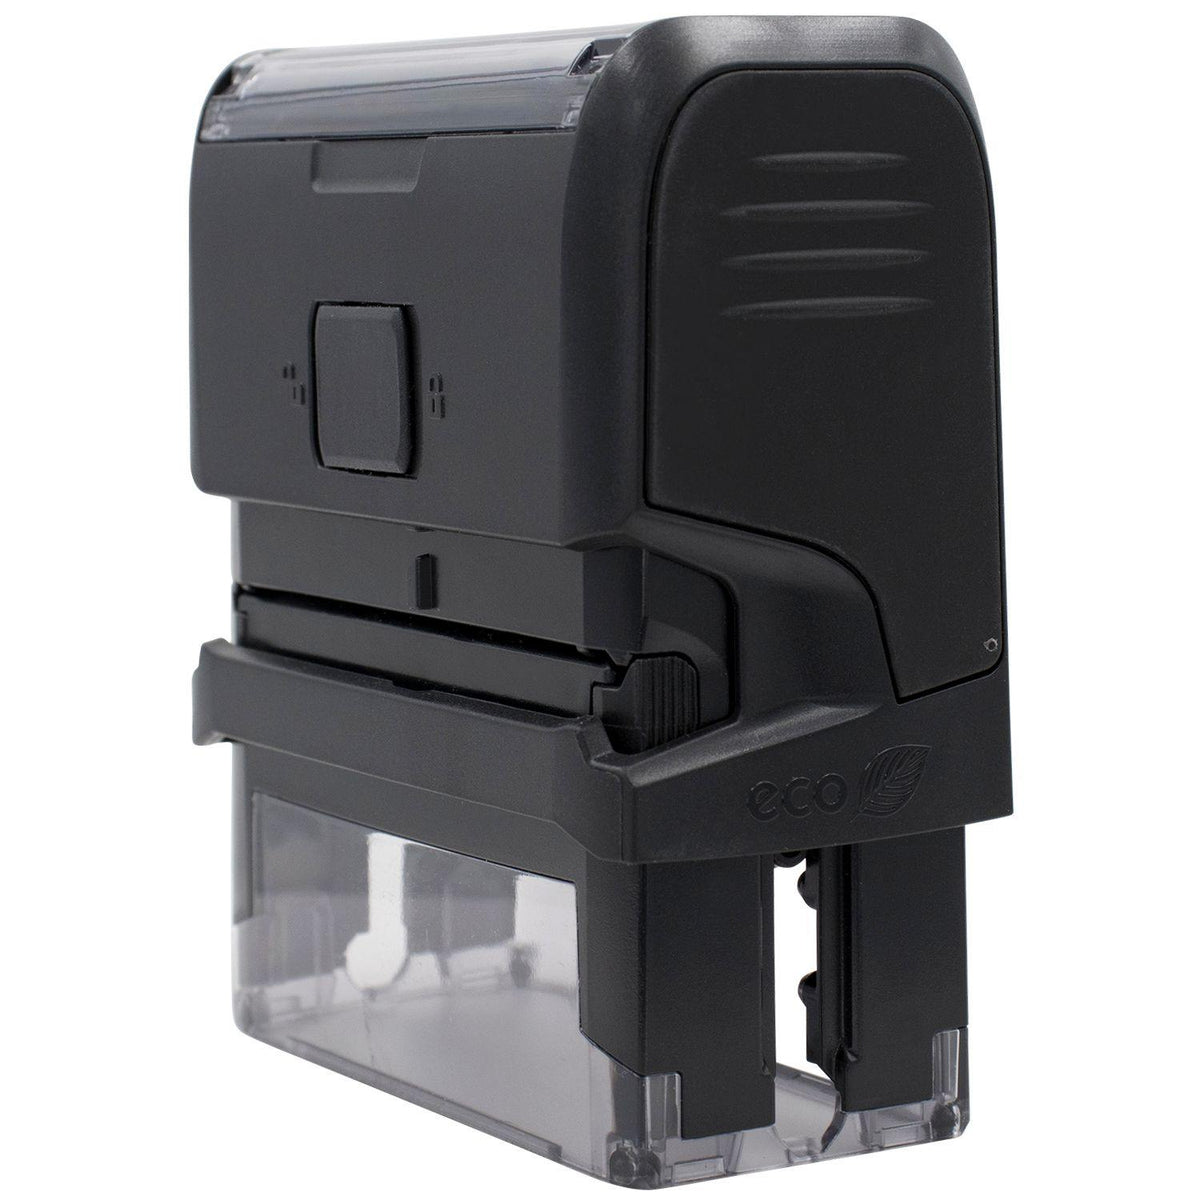 Self-Inking Stay Safe Stay Healthy Stamp - Engineer Seal Stamps - Brand_Trodat, Impression Size_Small, Stamp Type_Self-Inking Stamp, Type of Use_Medical Office